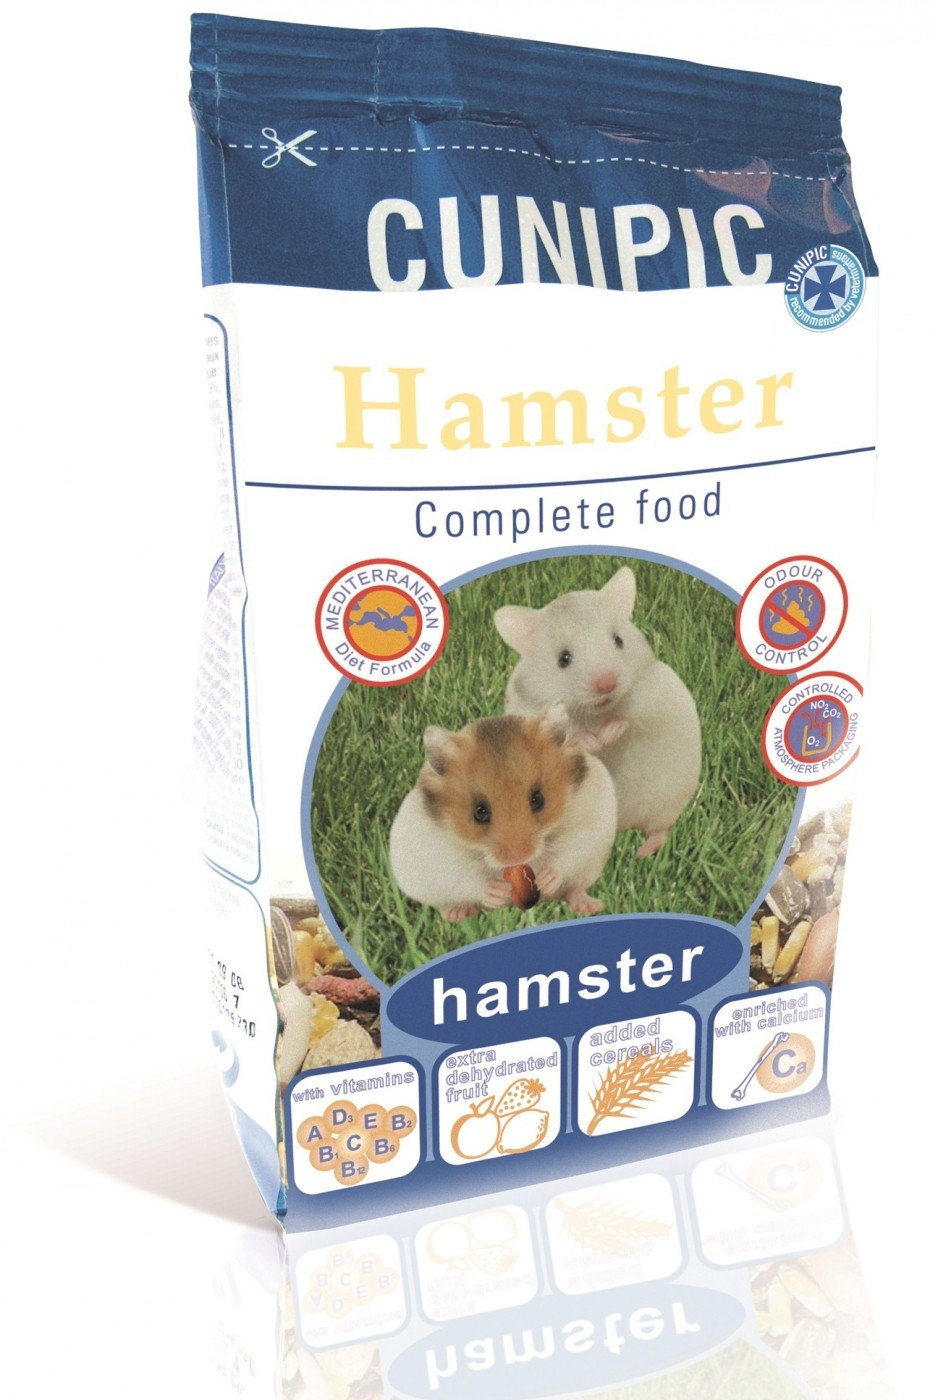 Cunipic Complete Hamster